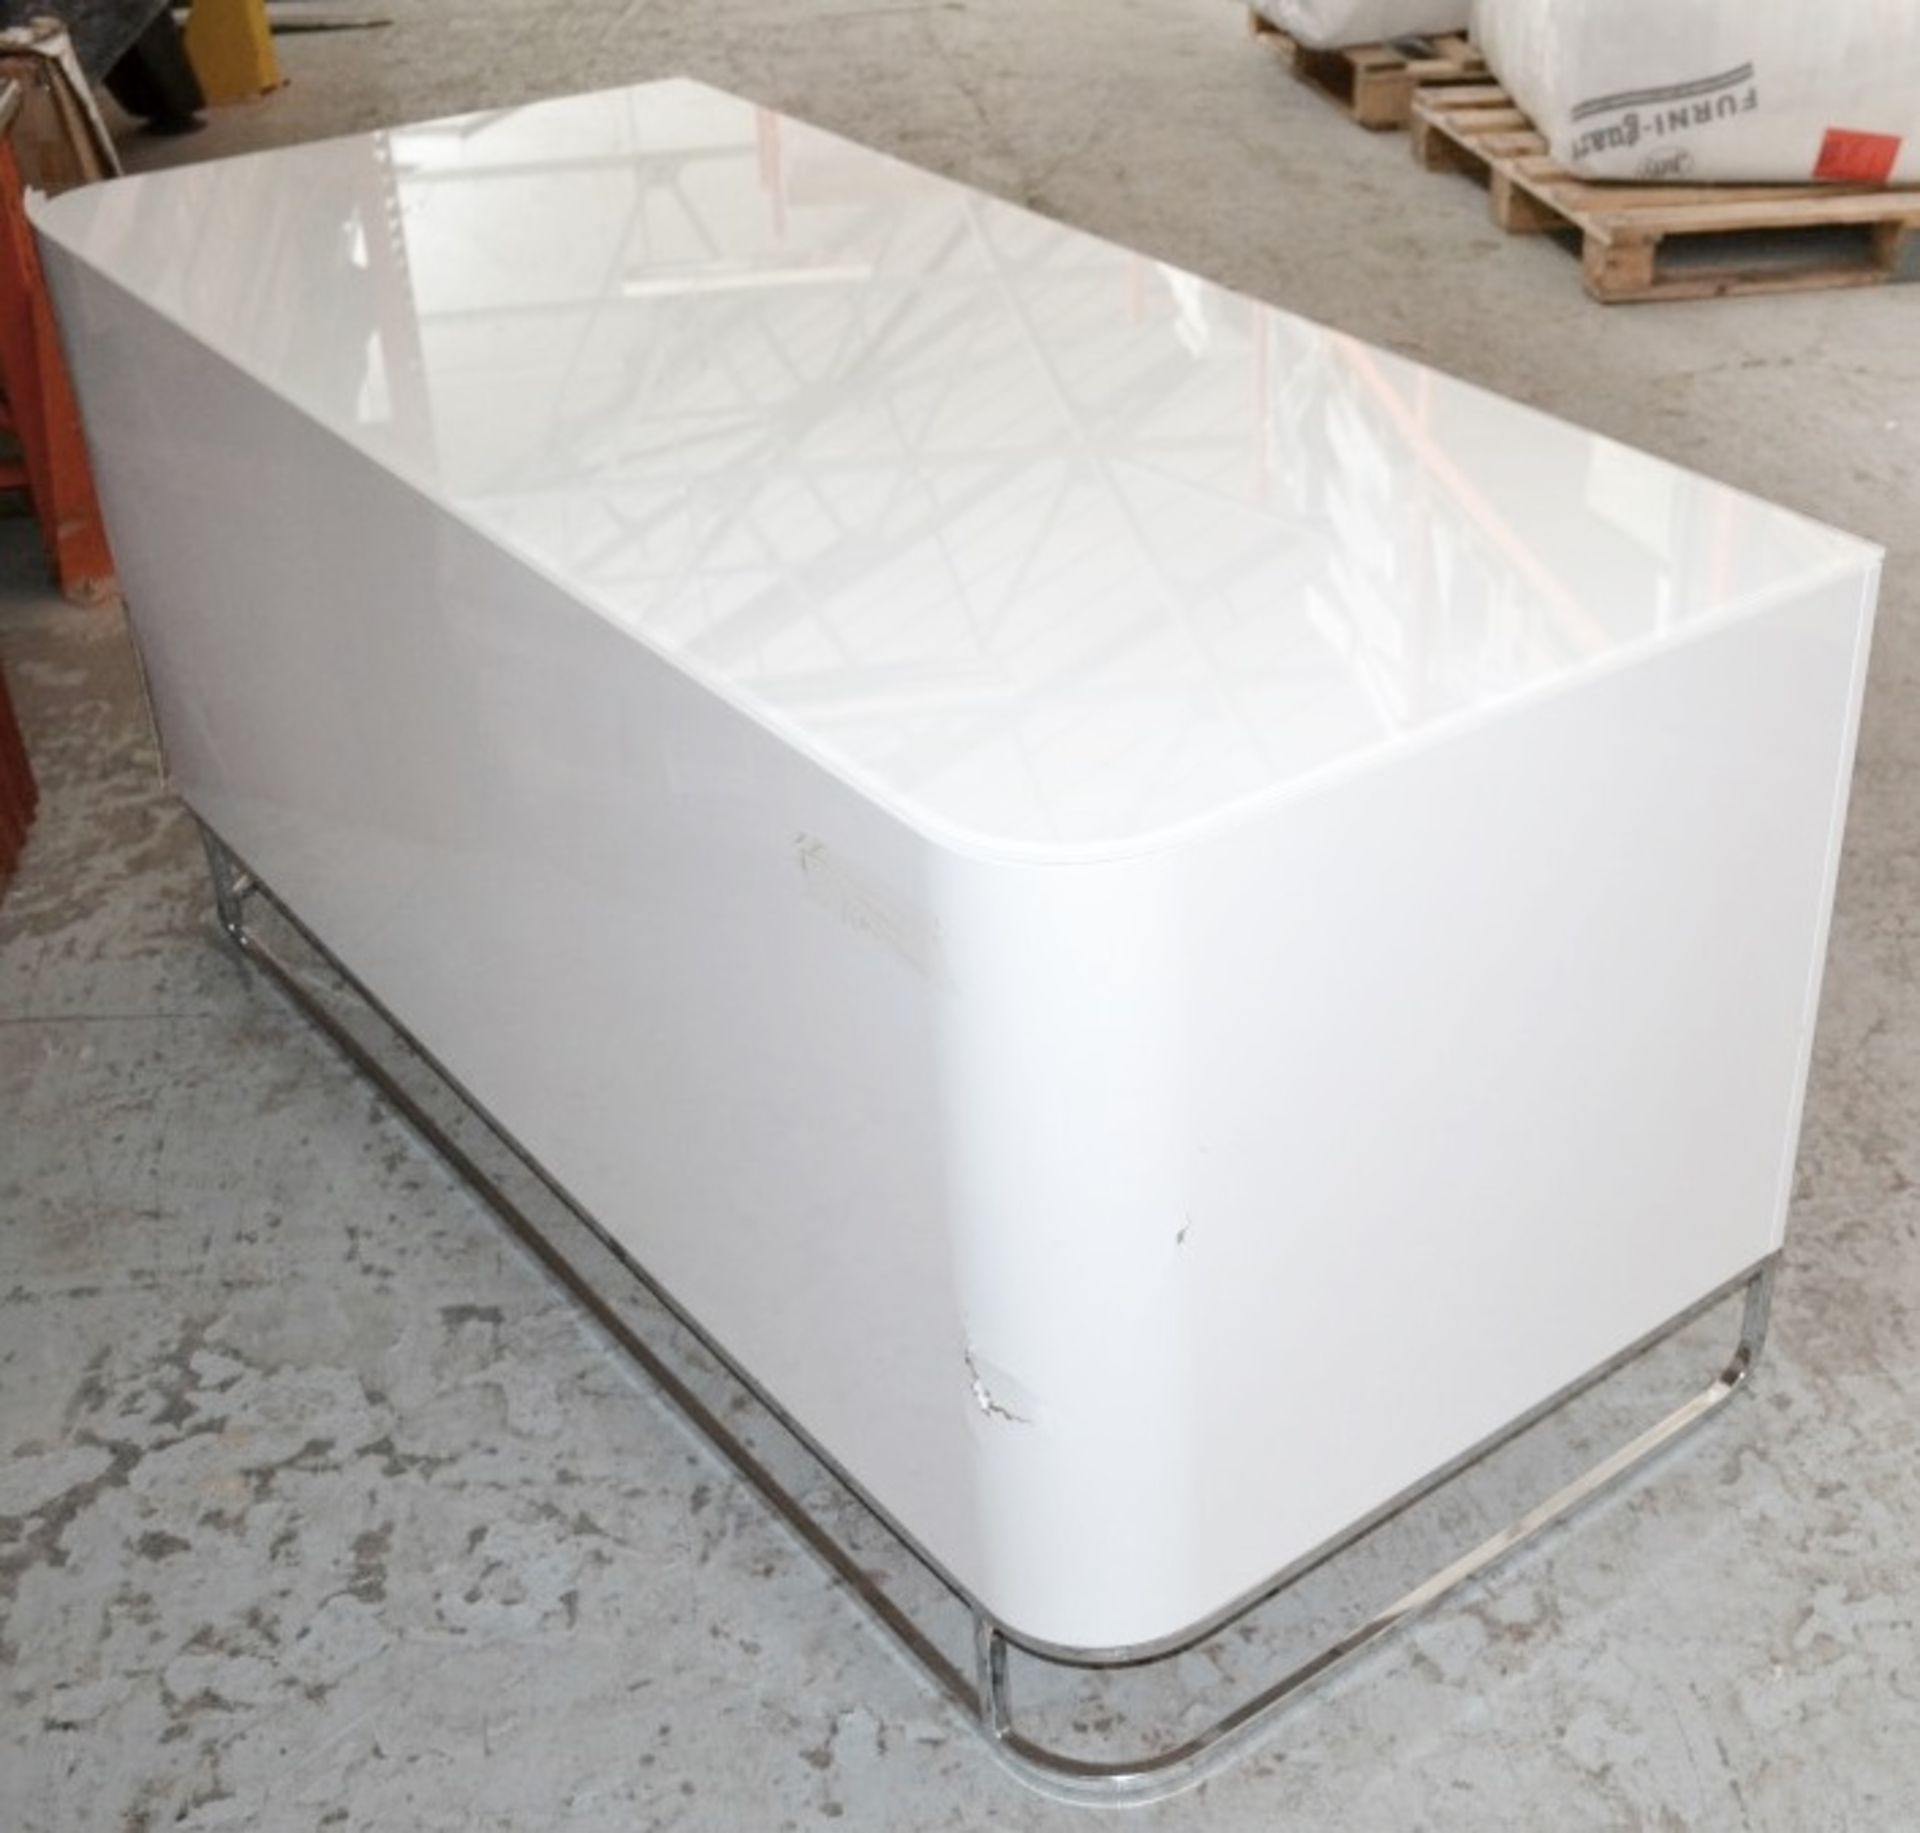 1 x LIGNE ROSET "Hyannis Port" Glass-topped Desk With A Gloss White Lacquer Finish - Dimensions: - Image 4 of 10